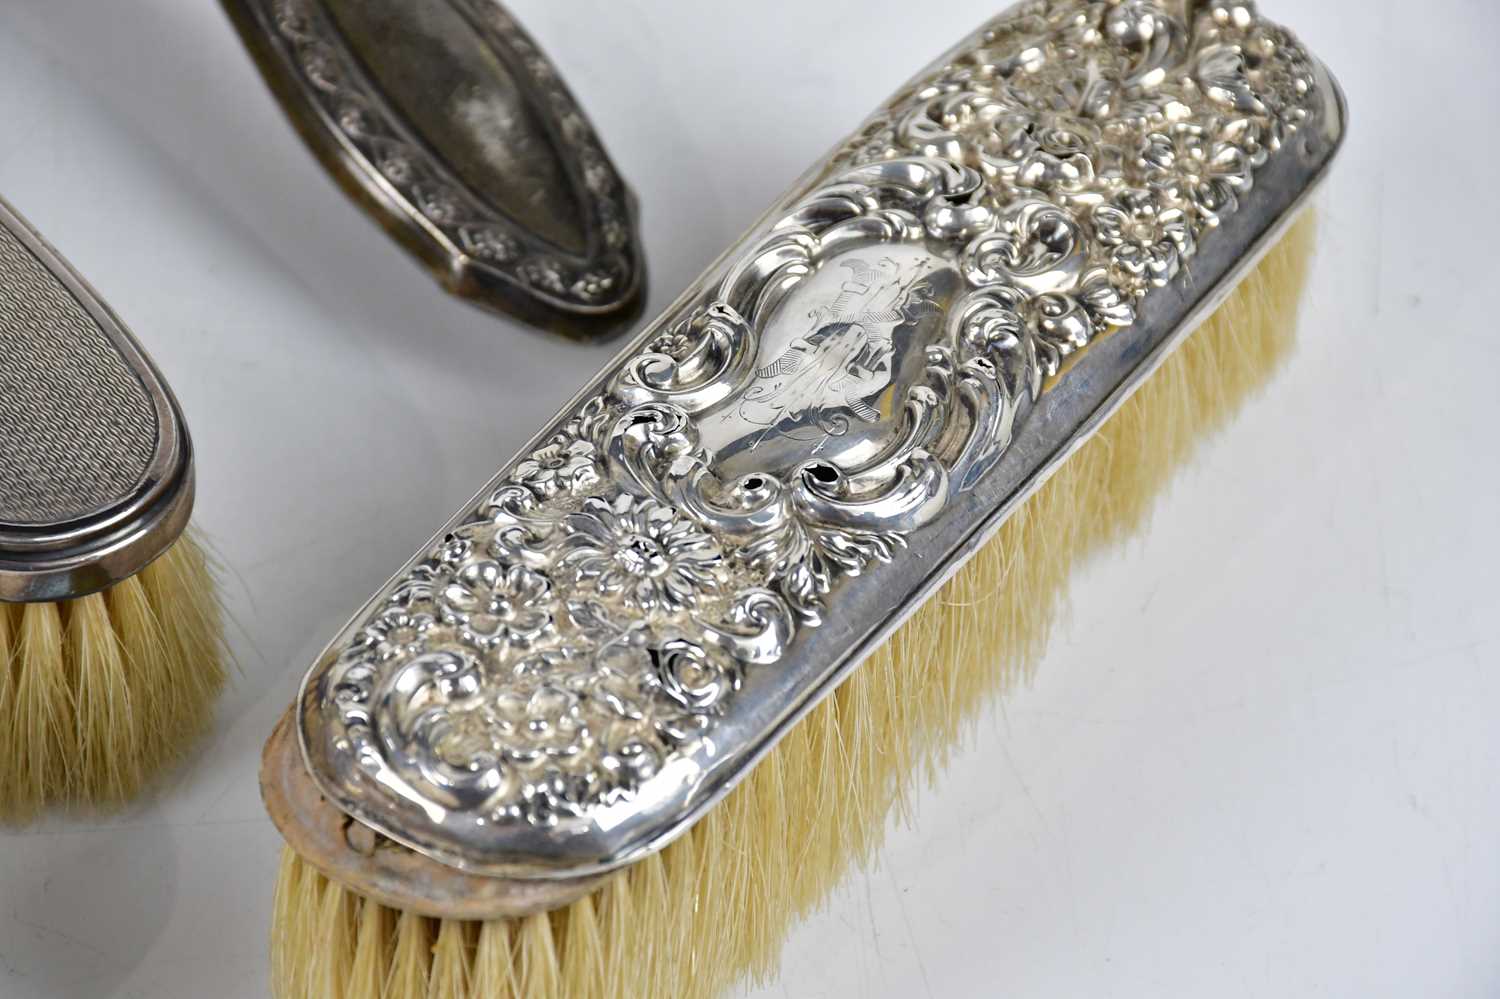 JOSEPH GLOSTER; a George V hallmarked silver brush with engine turned decoration, Birmingham 1934, - Image 3 of 4